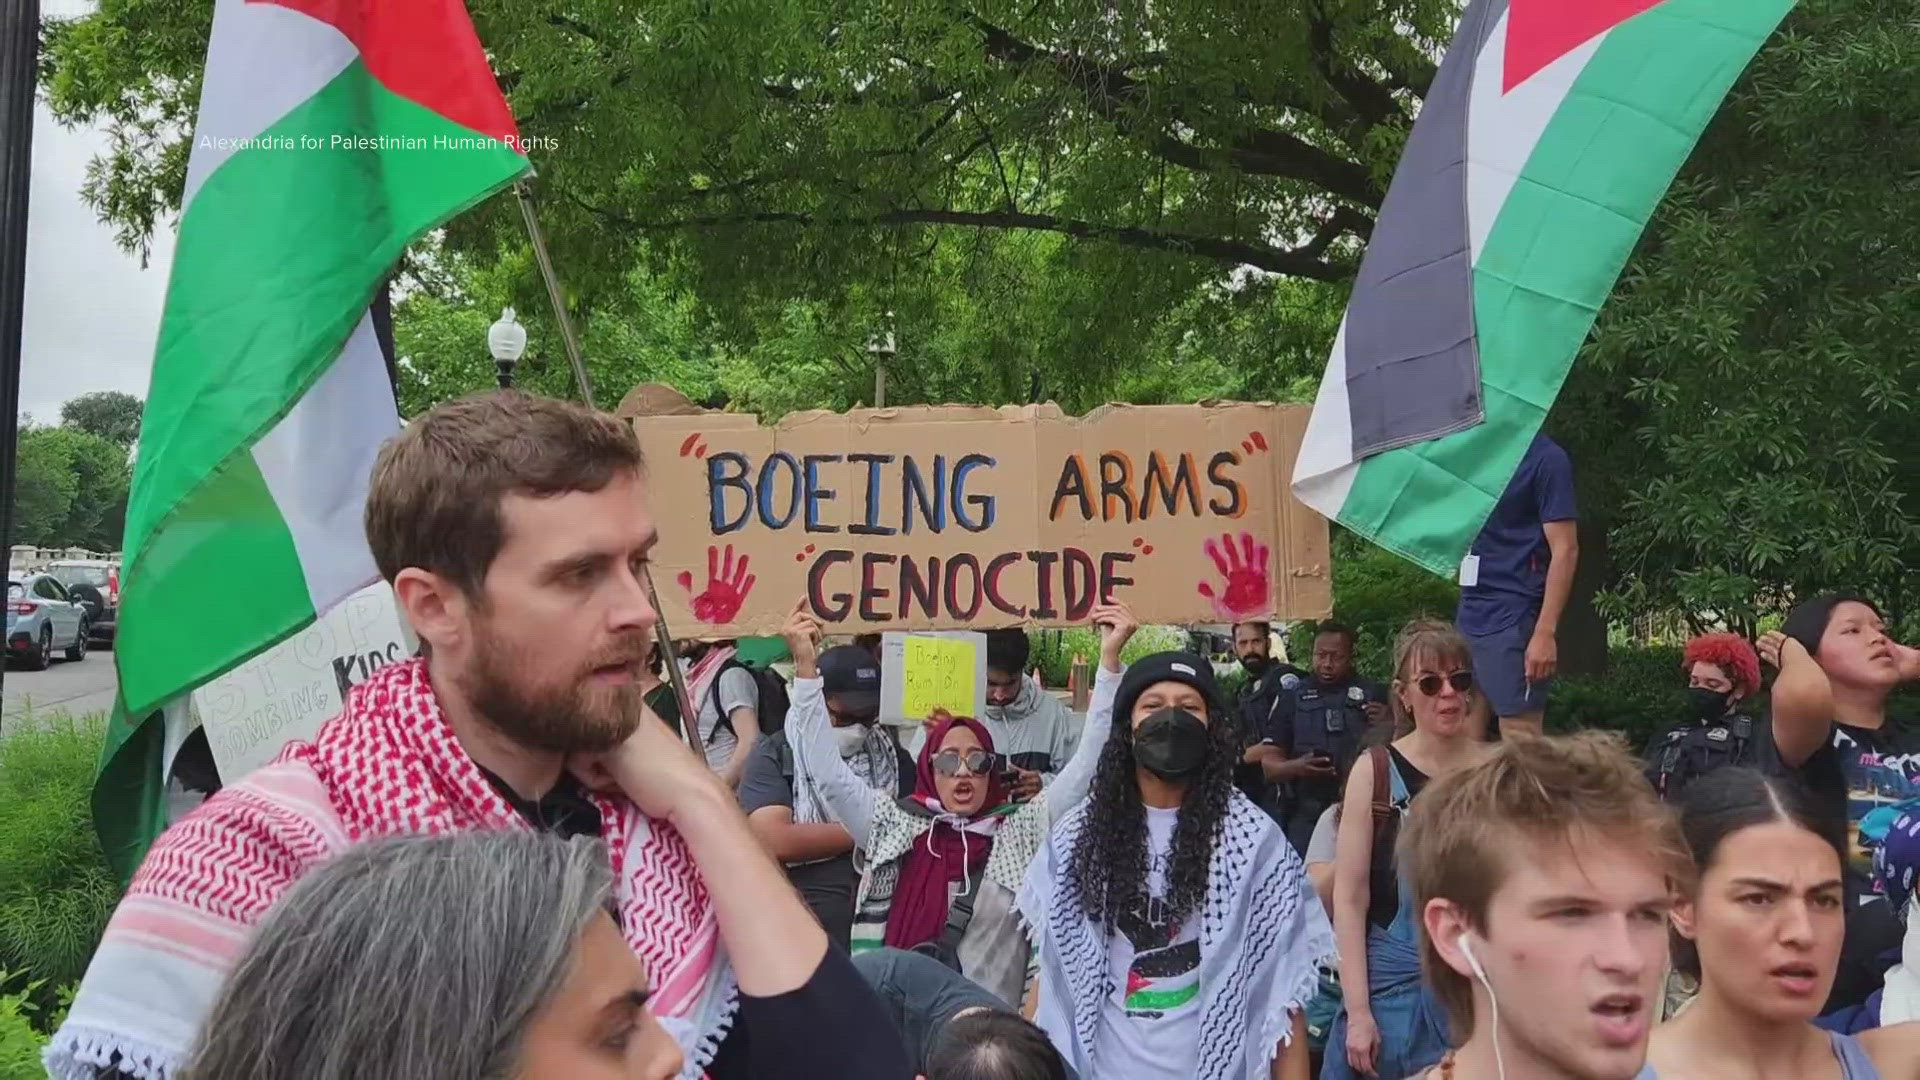 During the Memorial Day parade in D.C., pro-Palestinian protesters held a rally amid civilian deaths in Gaza.